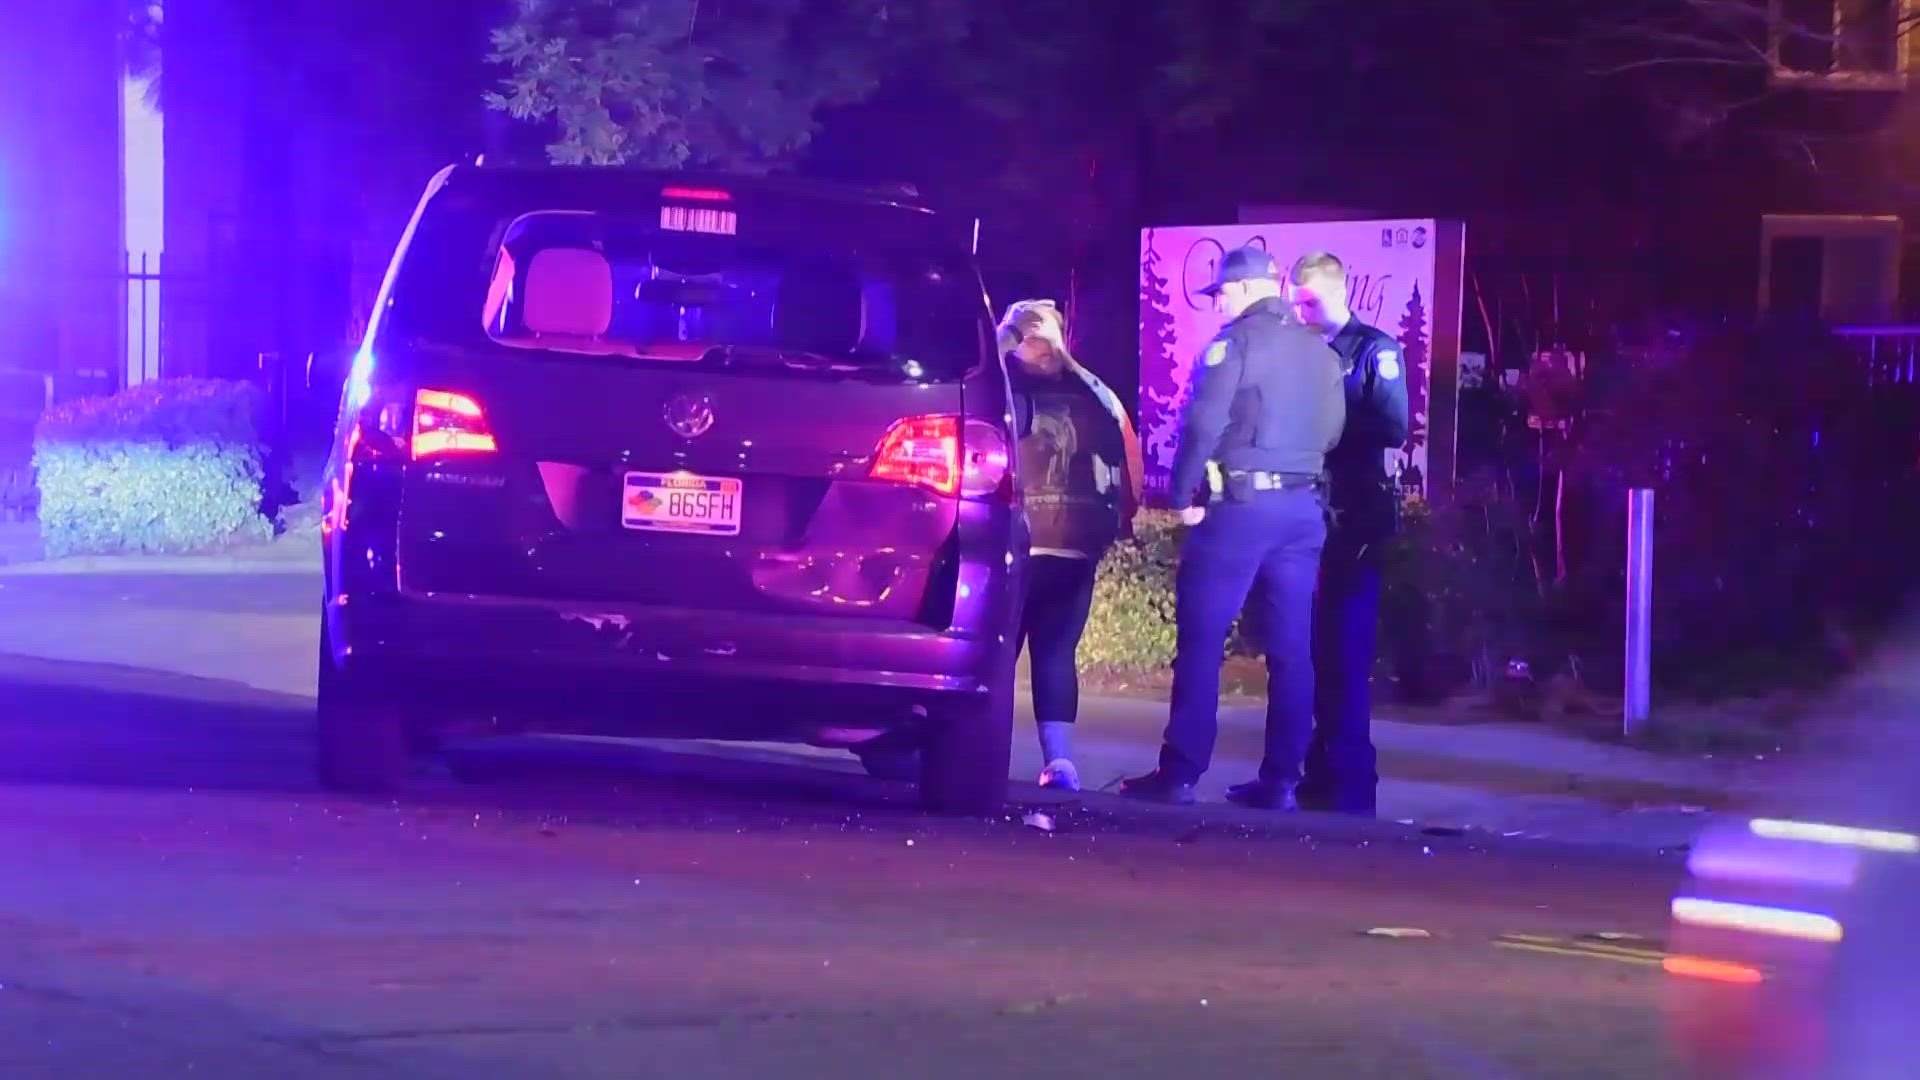 The Sacramento Police Department responded to the scene just after 12:15 a.m. after getting multiple calls of a sideshow on Amherst Street and Ferran Avenue.